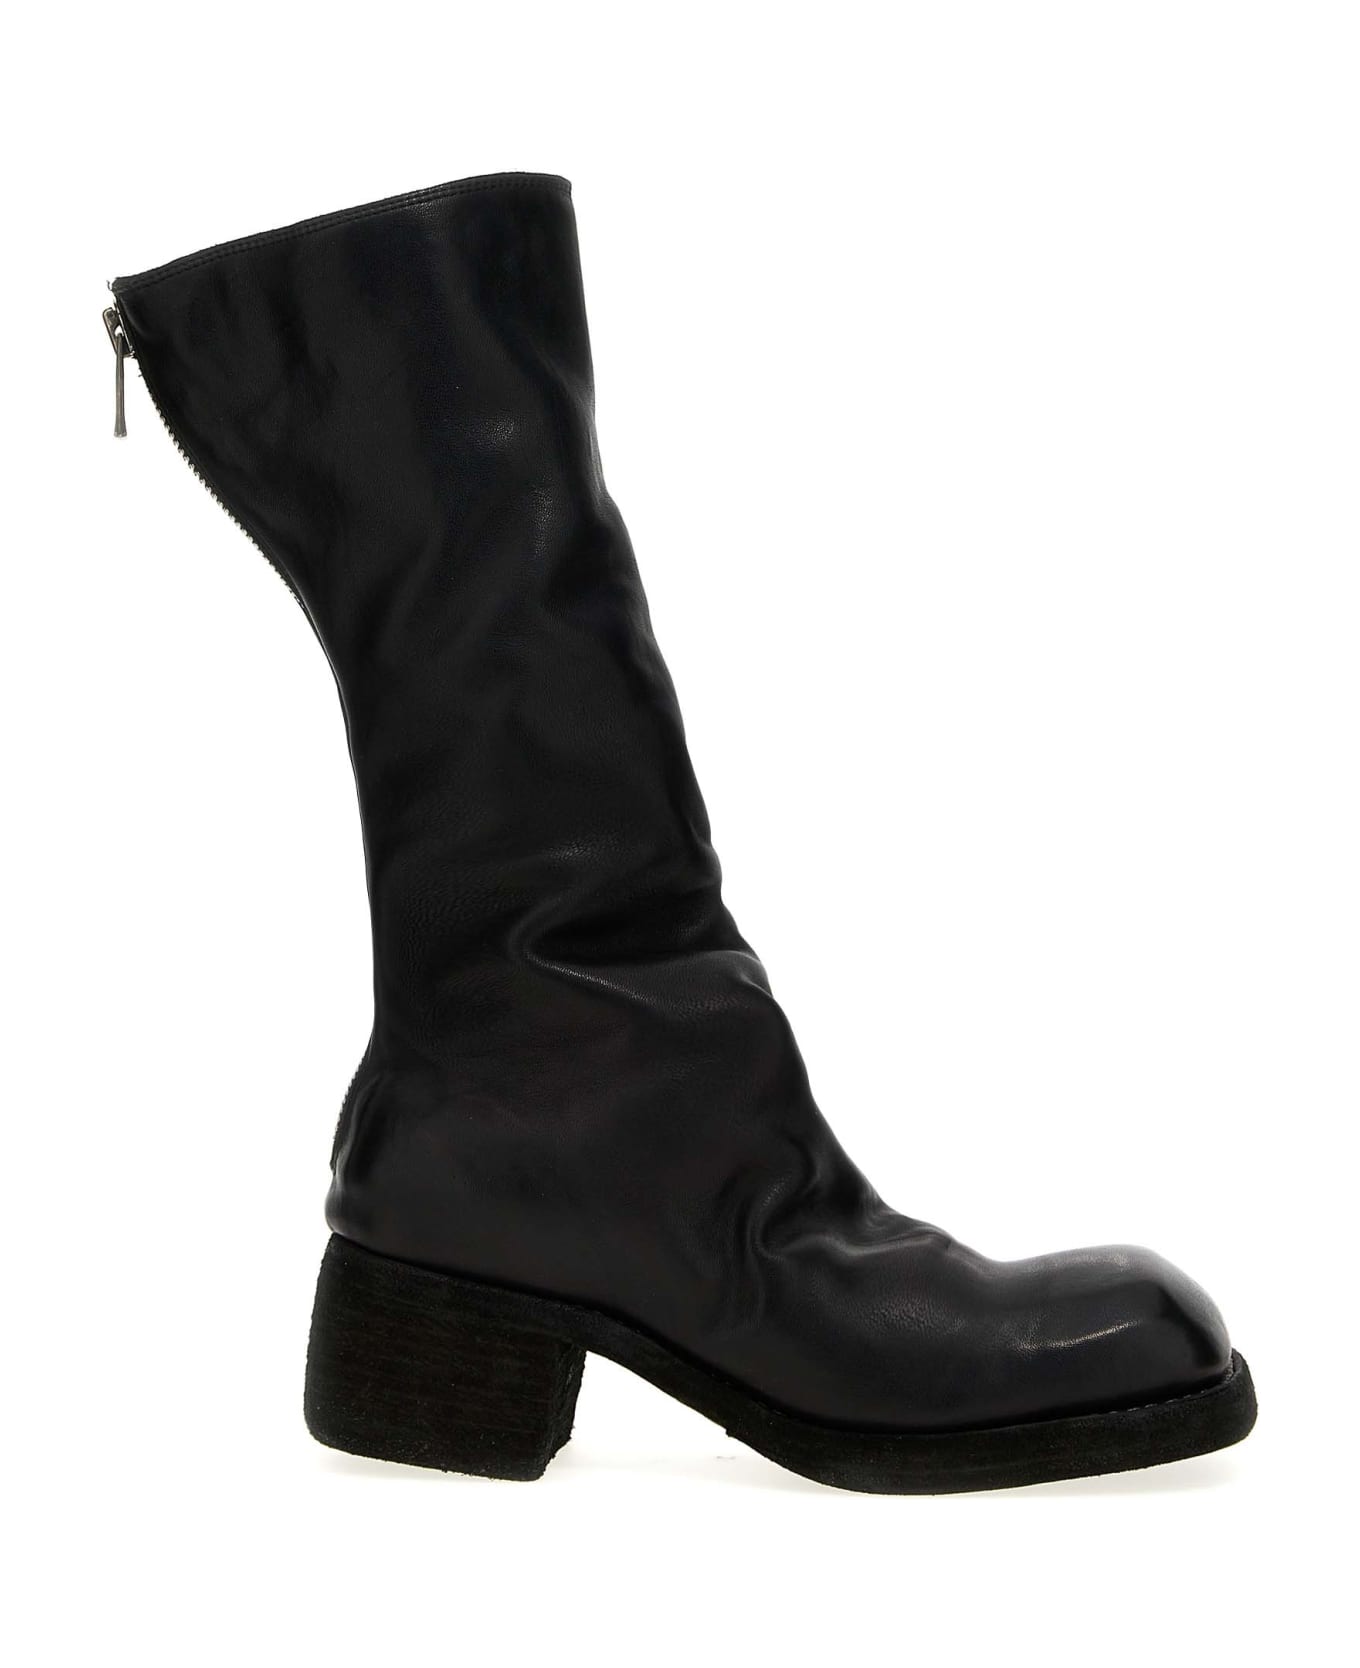 Guidi '9089' Ankle Boots - Black   ブーツ